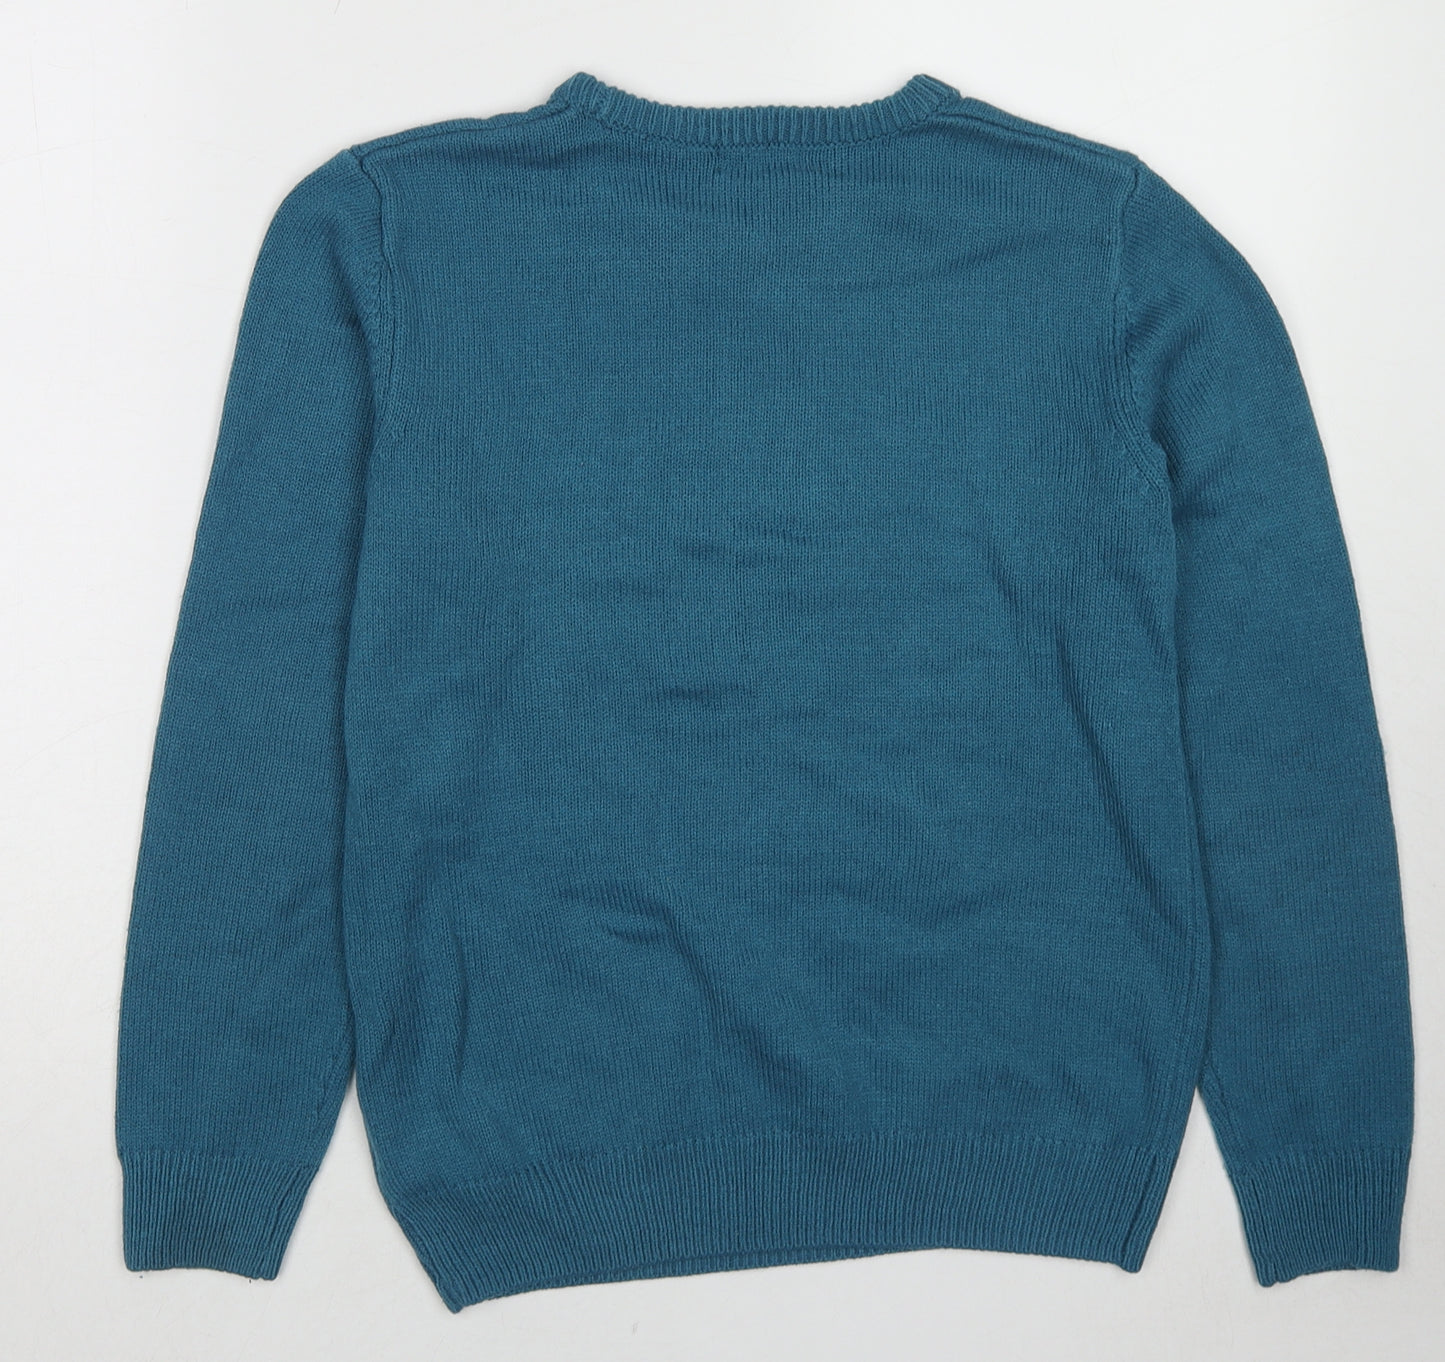 H&M Boys Blue Round Neck Acrylic Pullover Jumper Size 12-13 Years Pullover - Size 12-14 Just Chillin' Christmas